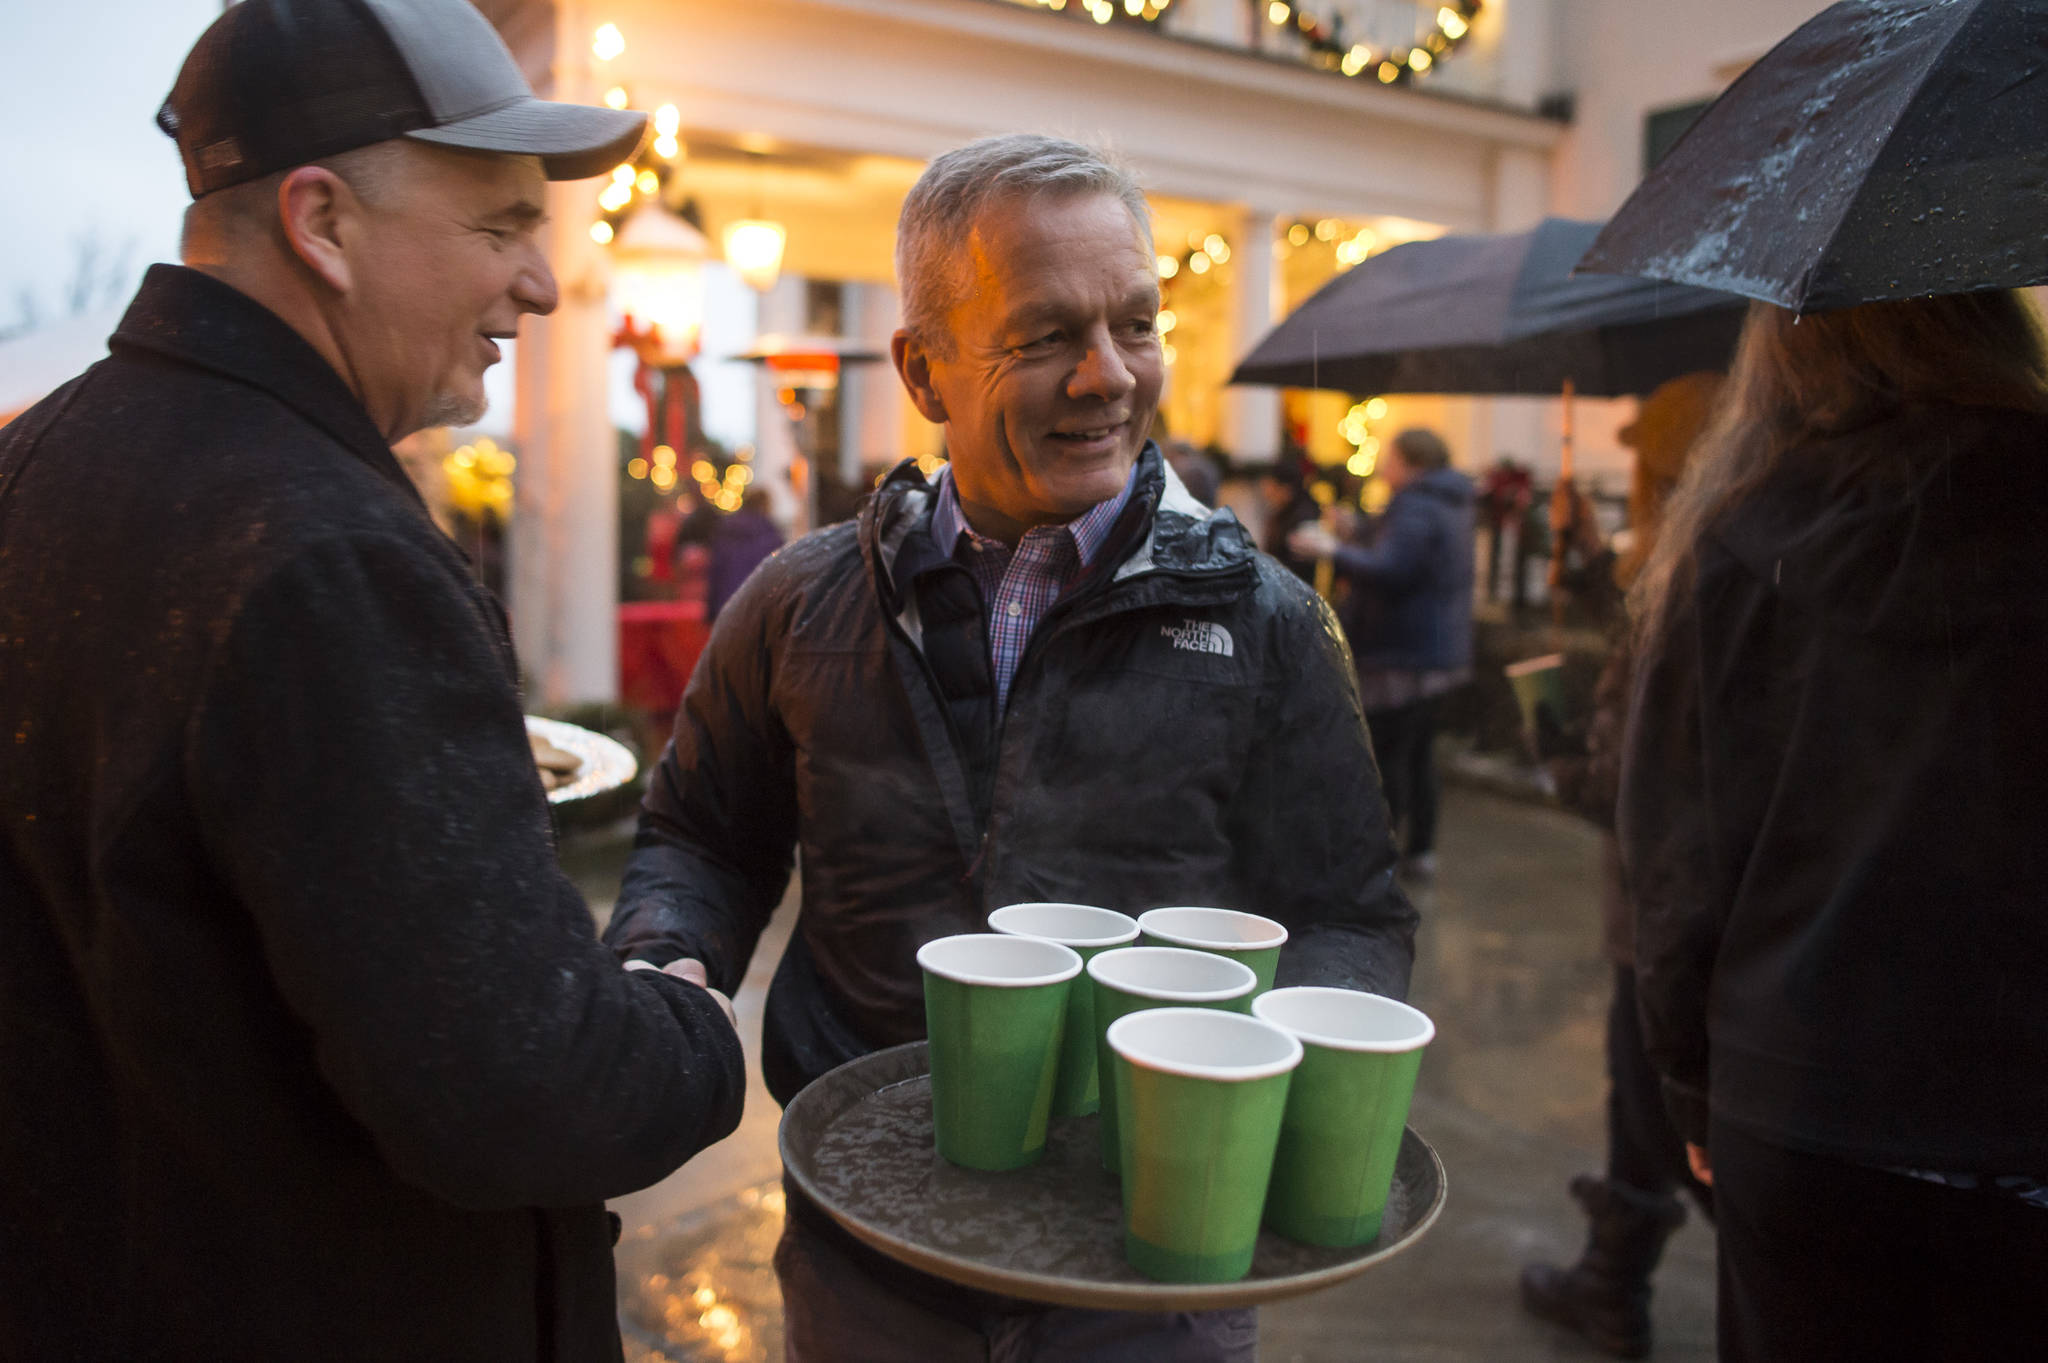 Special advisor Ben Stevens, center, and Legislative Liaison for the Department of Transportation and Public Facilities Mike Lesmann, left, serve cookies and cider to Juneau residents waiting at the Governor’s Open House on Tuesday, Dec. 11, 2018. (Michael Penn | Juneau Empire)